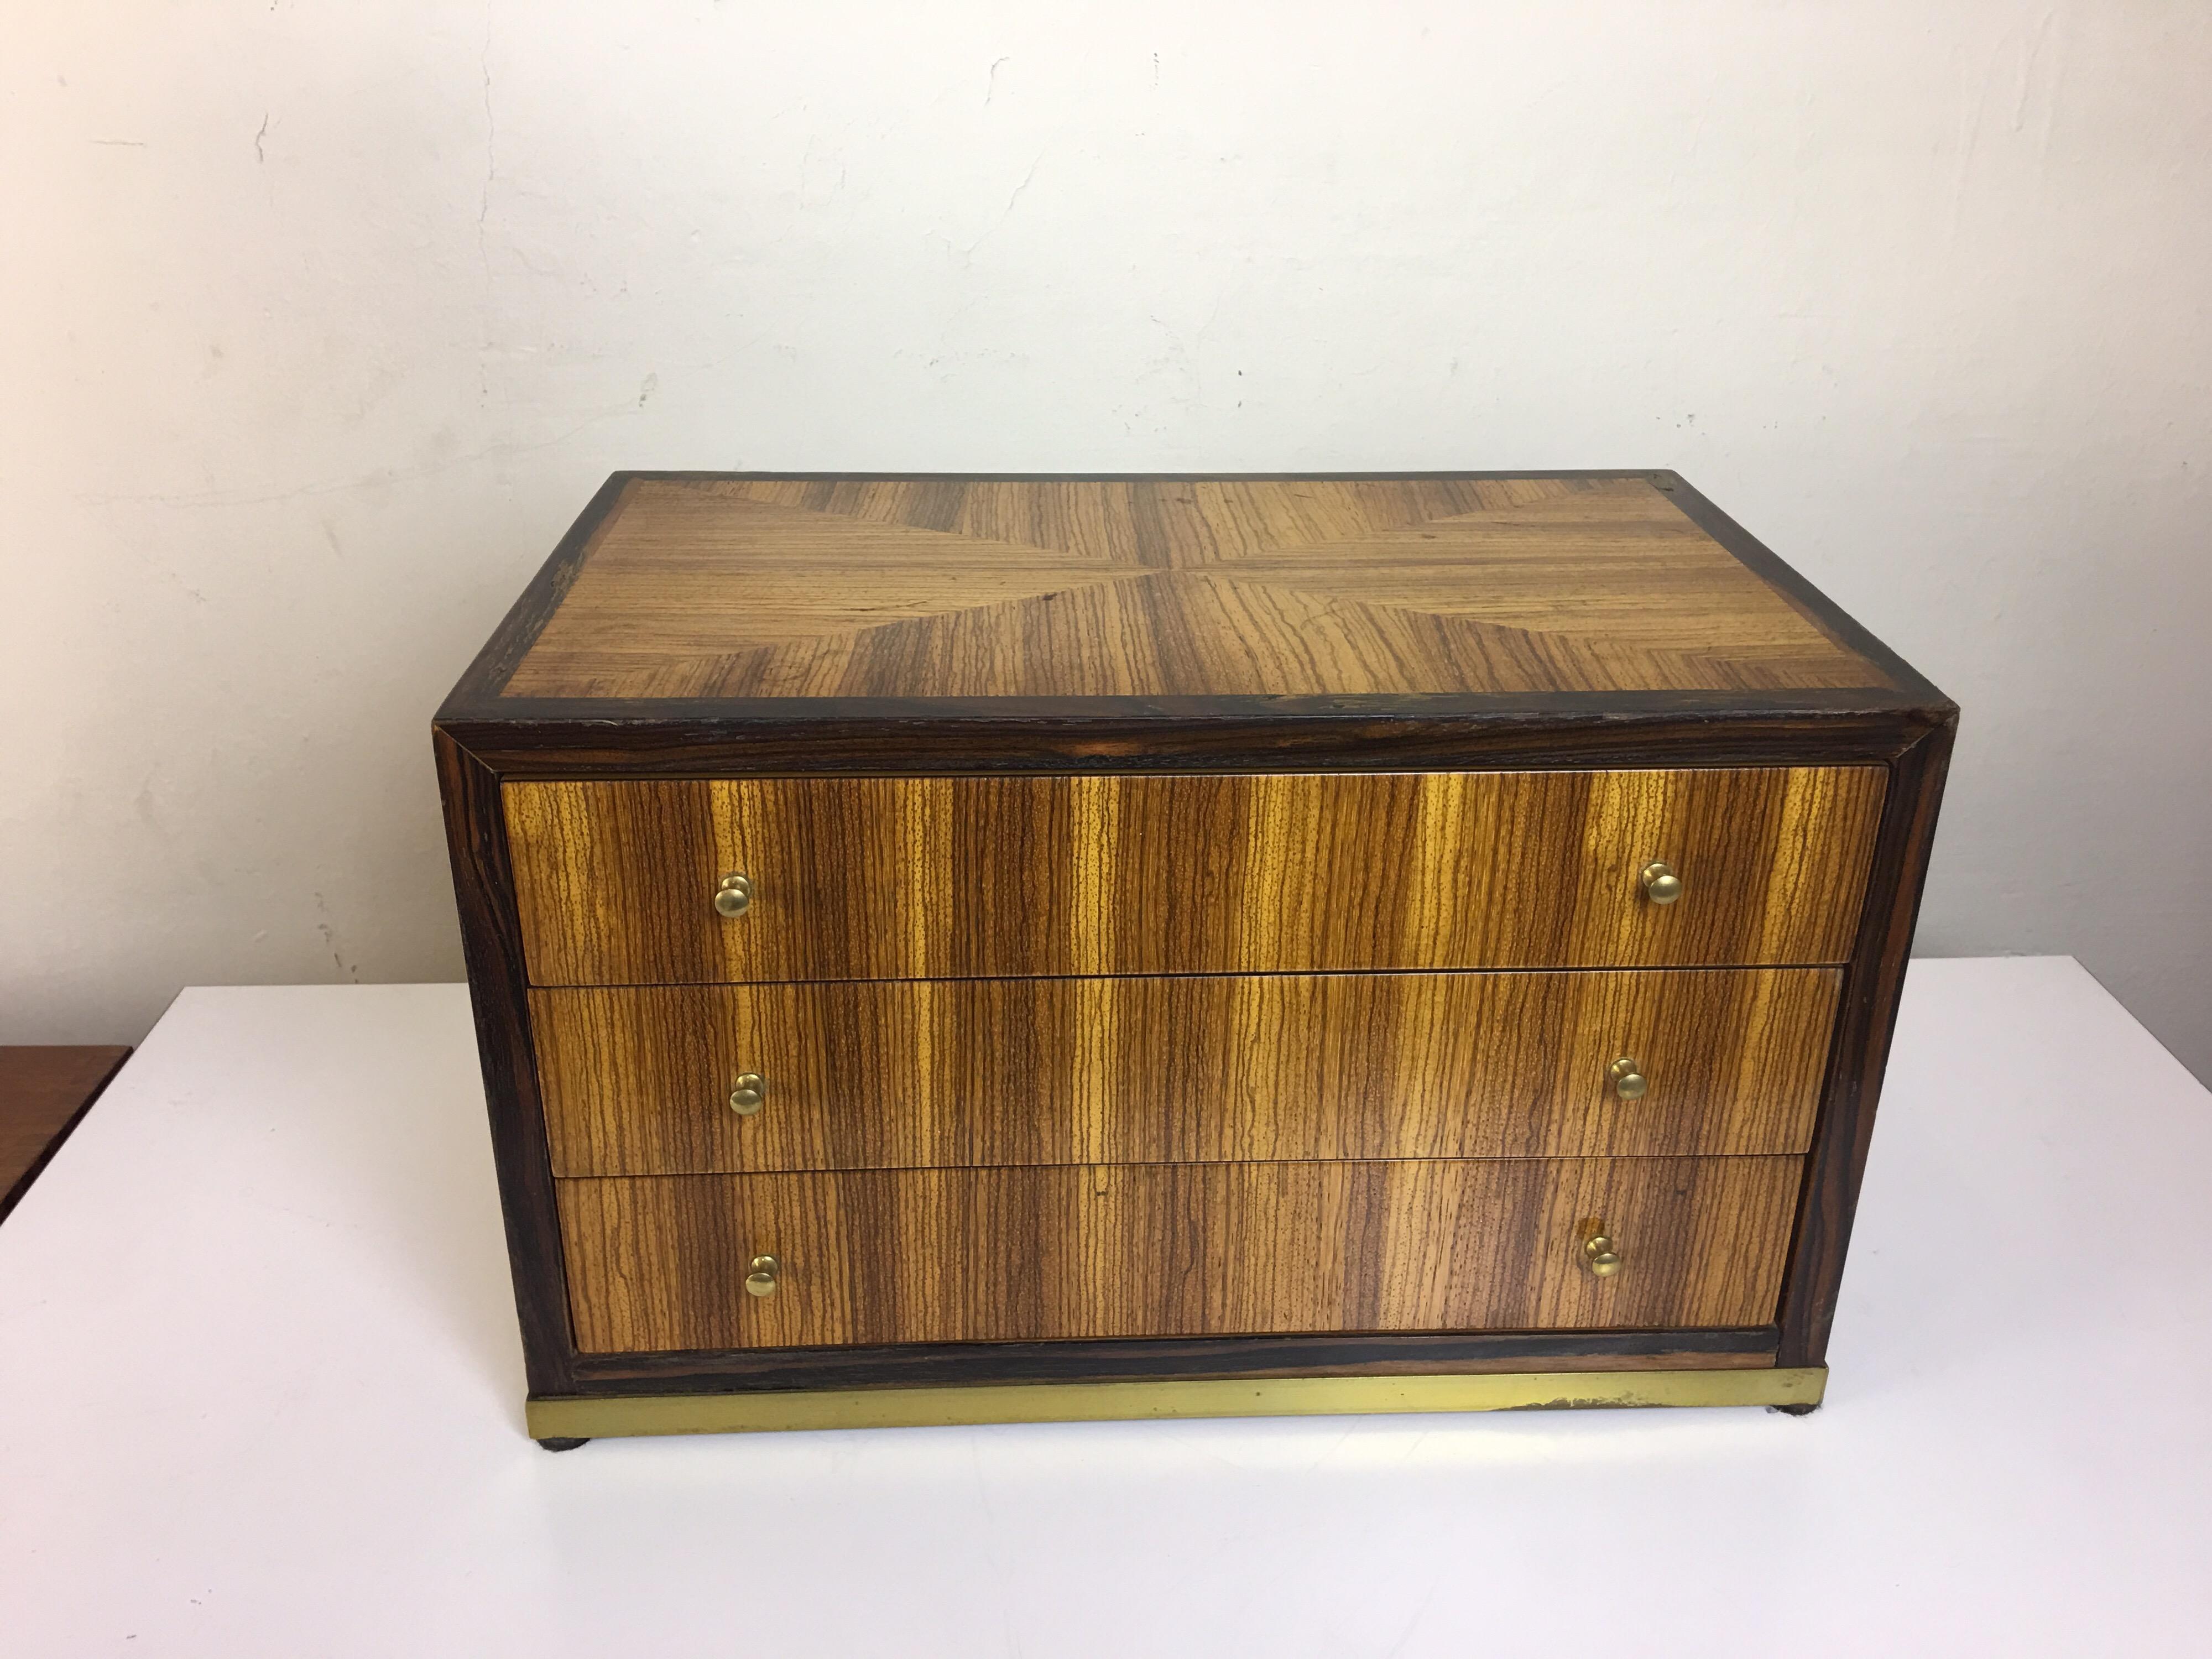 Rosewood and walnut Baker Furniture jewelry box/ chest. Three drawers for ample storage. Raised up on a brass square base with small brass knobs. Very elegant graceful design.